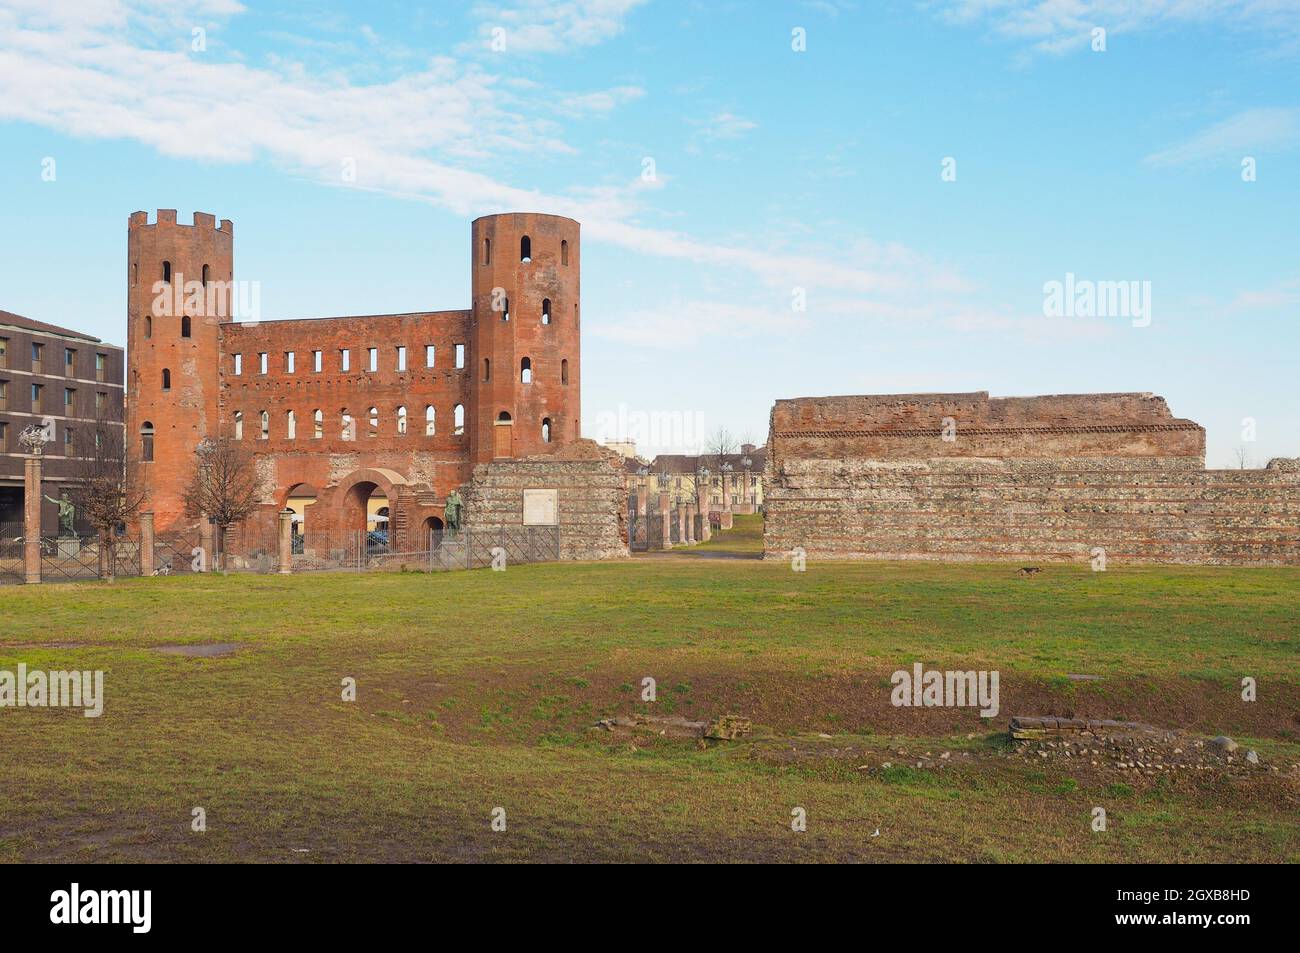 Palatine towers Porte Palatine ruins of ancient roman town gates and wall in Turin. Stock Photo